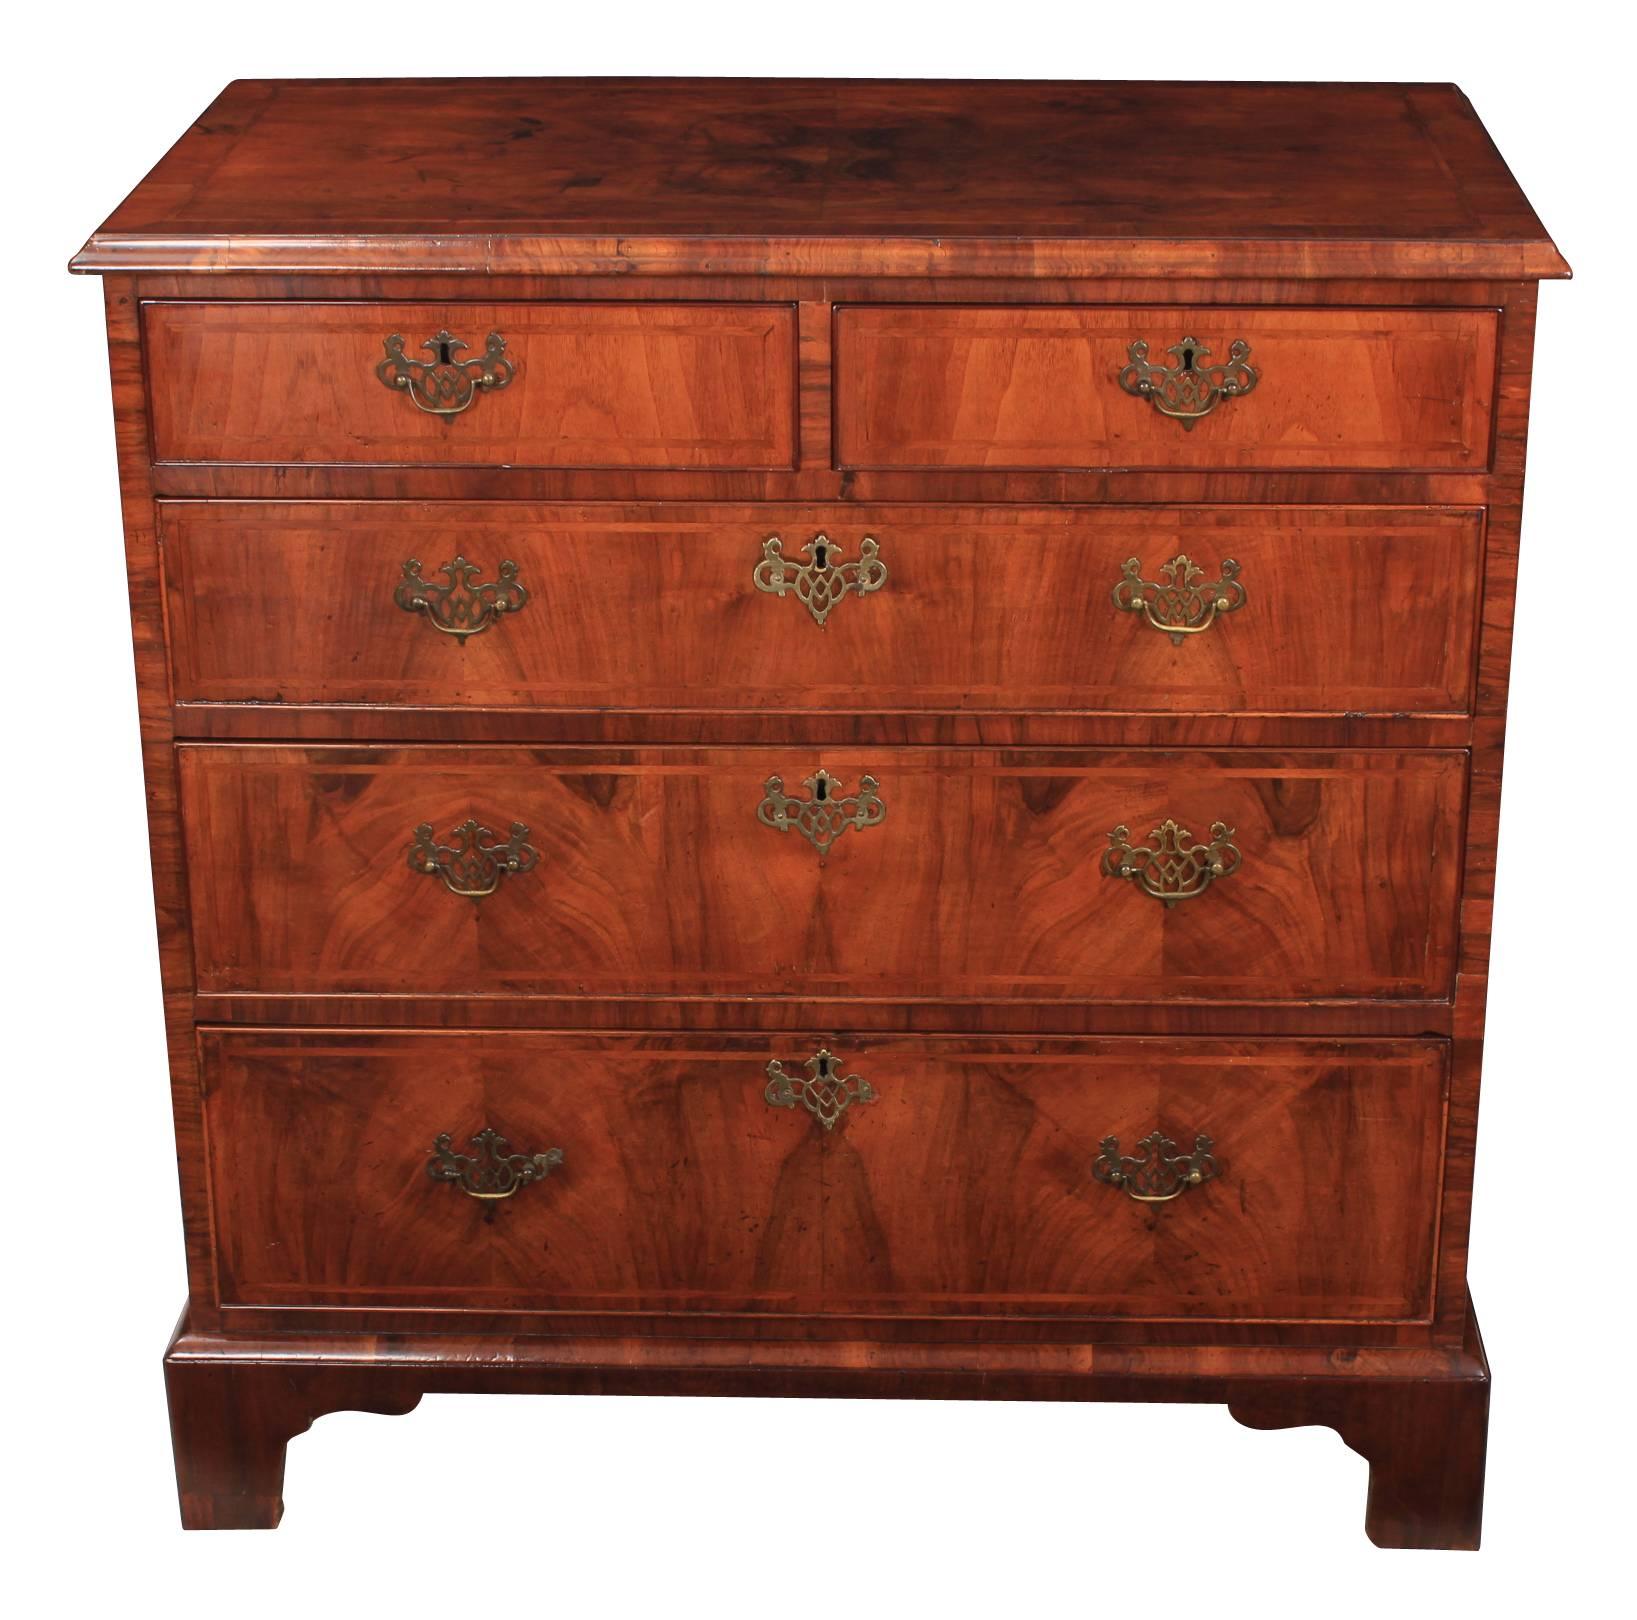 English, circa 1710.
This Queen Anne chest of drawers is offered in superb condition.
Quarter veneered, cross-banded and feather-banded walnut top over 2 short and 3 long graduated drawers.
The drawers are of solid oak dovetailed construction